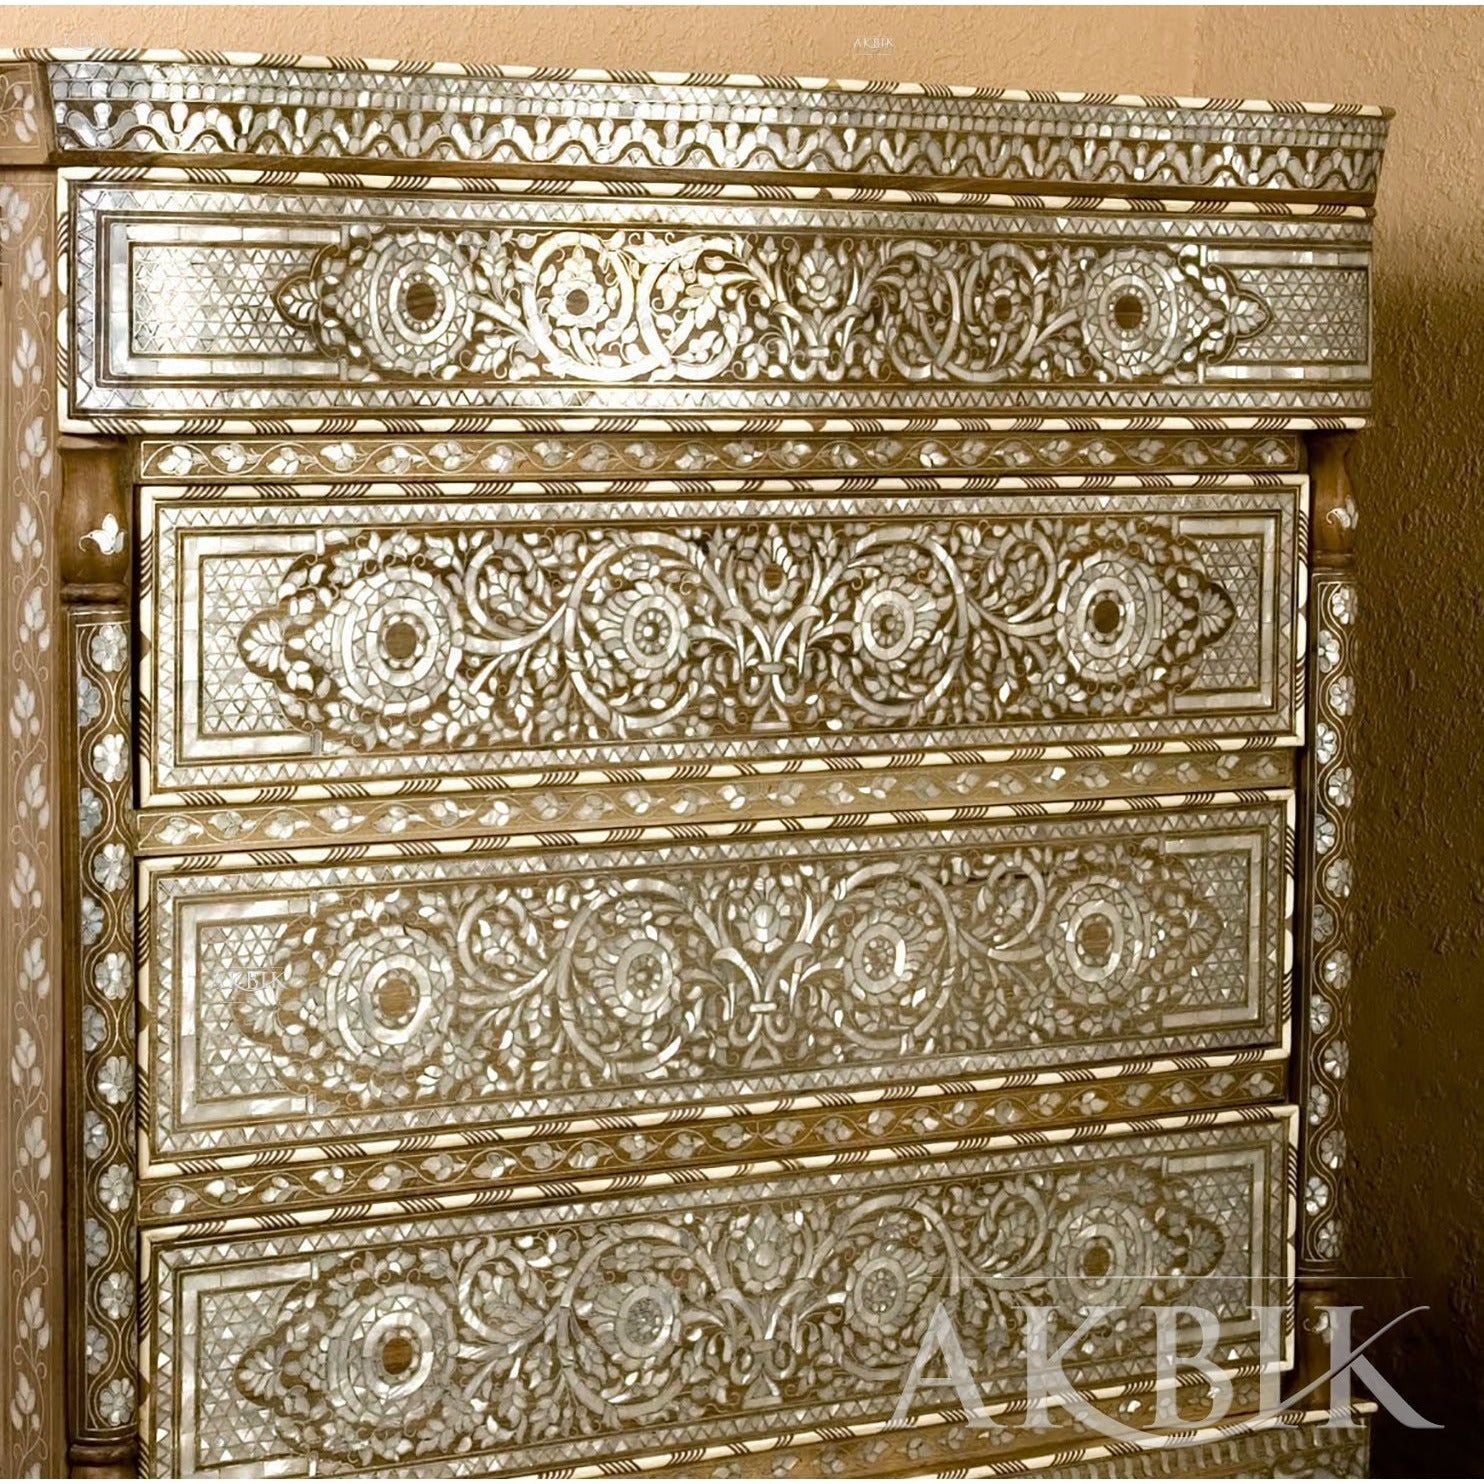 BEYOND THE PEARLS CHEST OF DRAWERS - AKBIK Furniture & Design